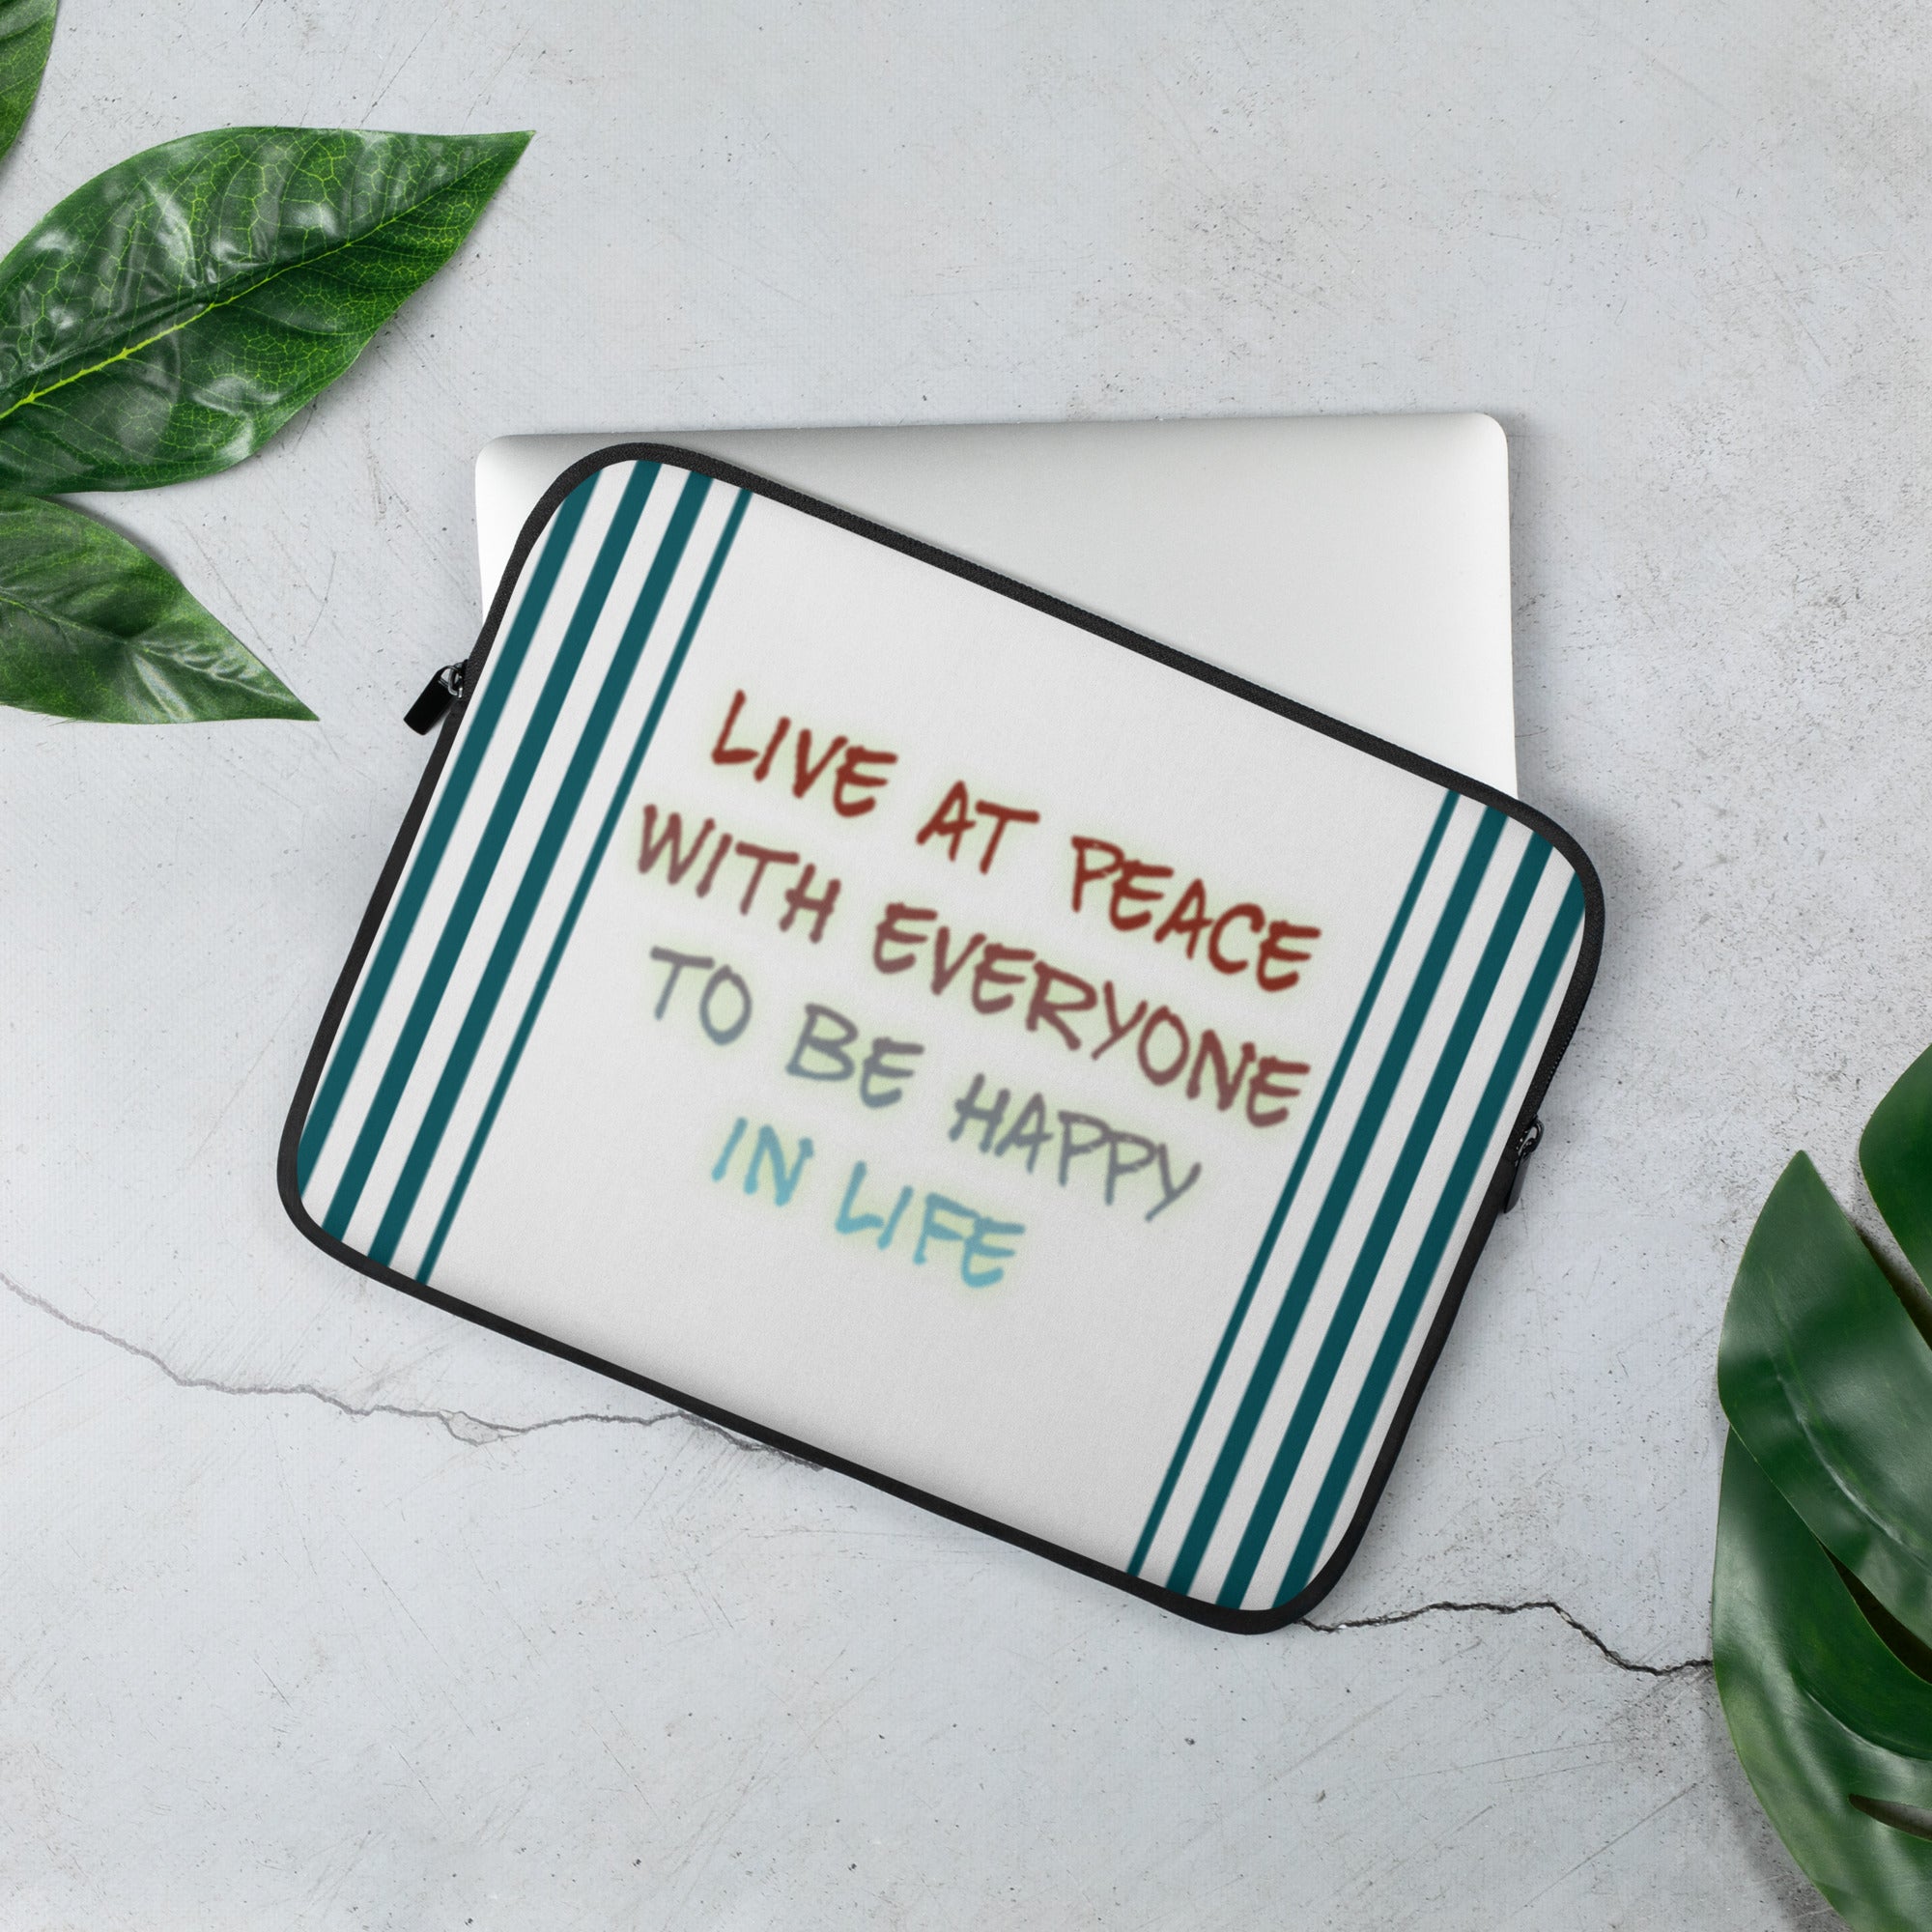 GloWell Designs - Laptop Sleeve - Motivational Quote - Live At Peace With Everyone - GloWell Designs